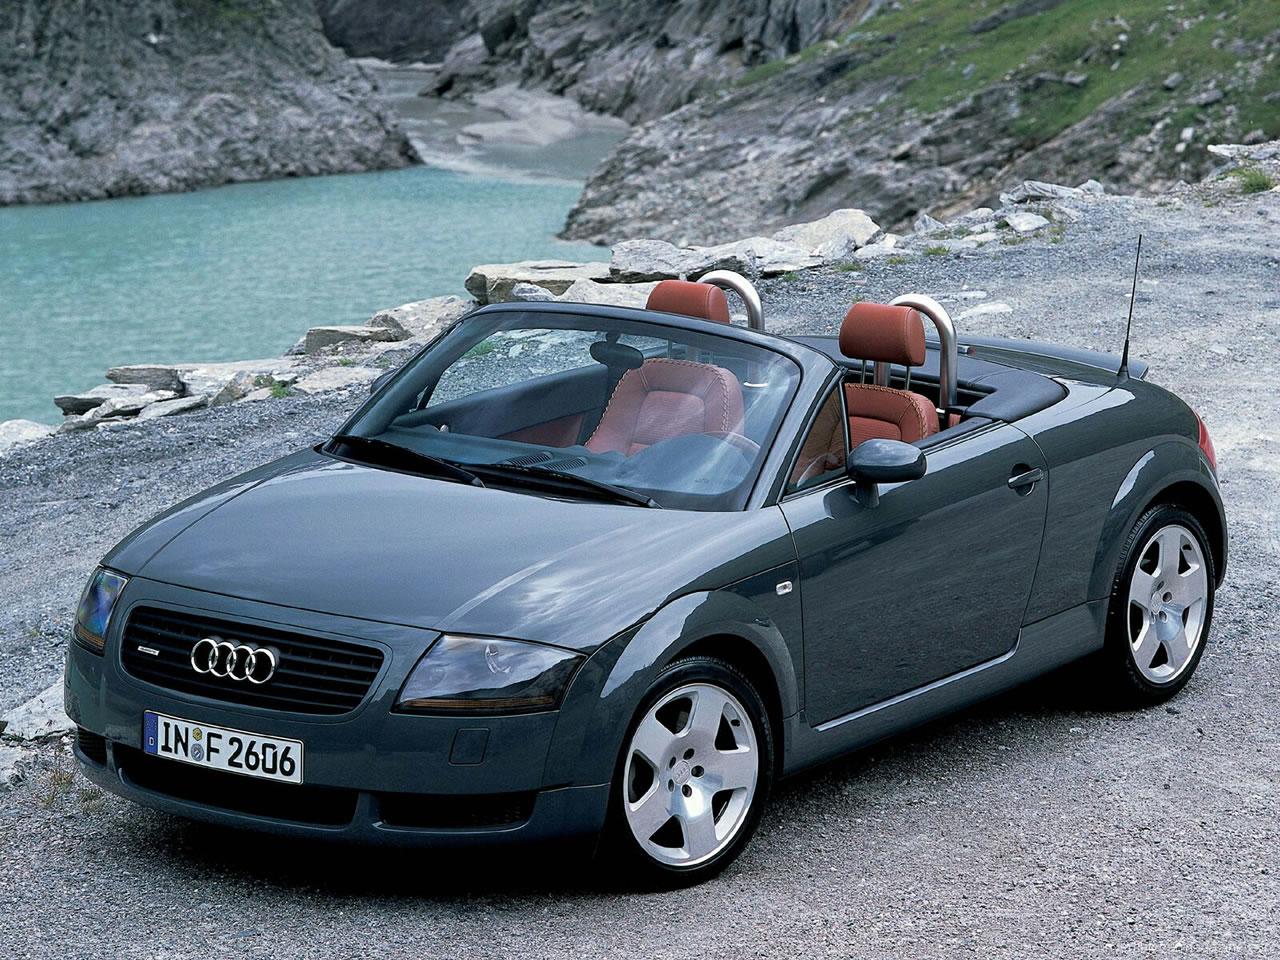 Amazing Audi TT Roadster Pictures & Backgrounds